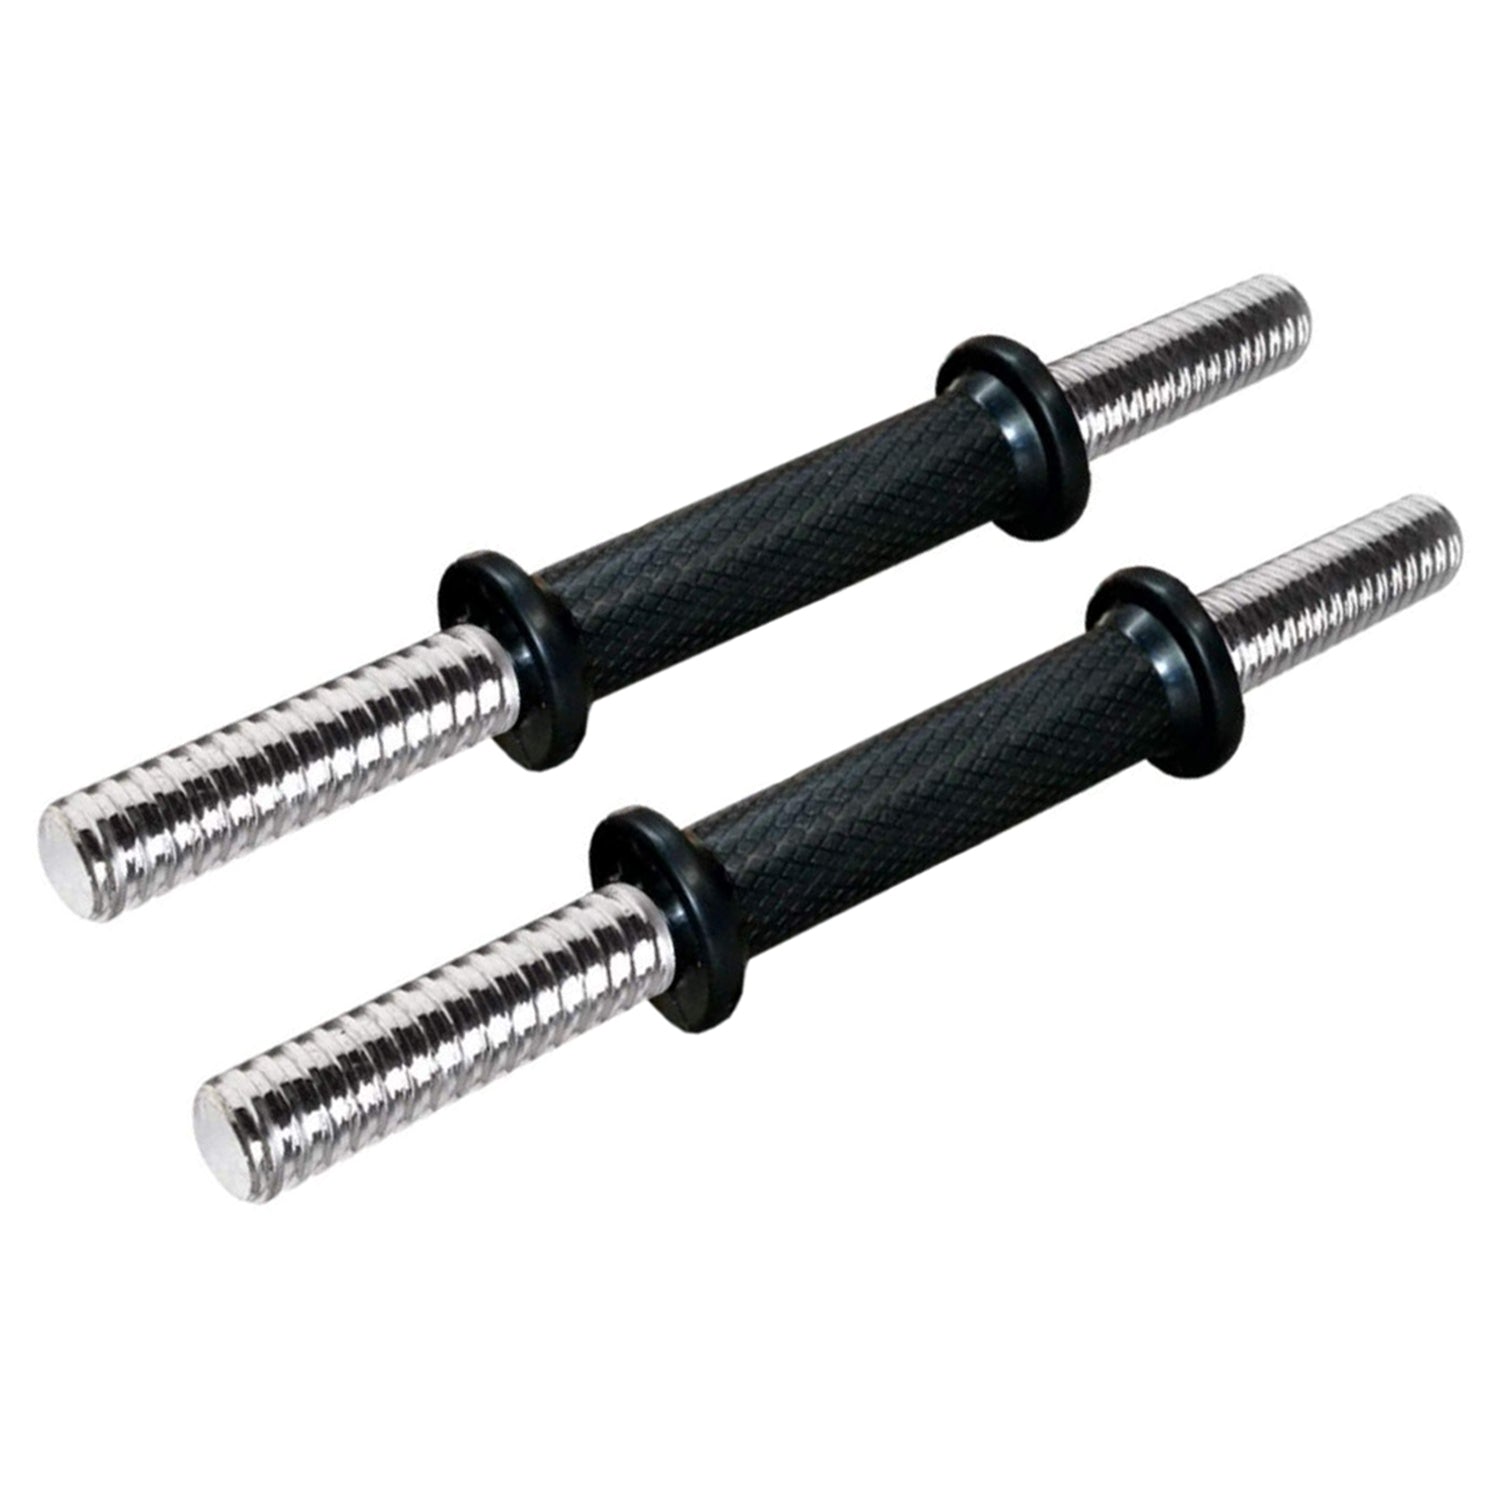 Prokick 14 Inches Weight Lifting Dumbbell Rod With Bolt (Set Of 2) - Best Price online Prokicksports.com